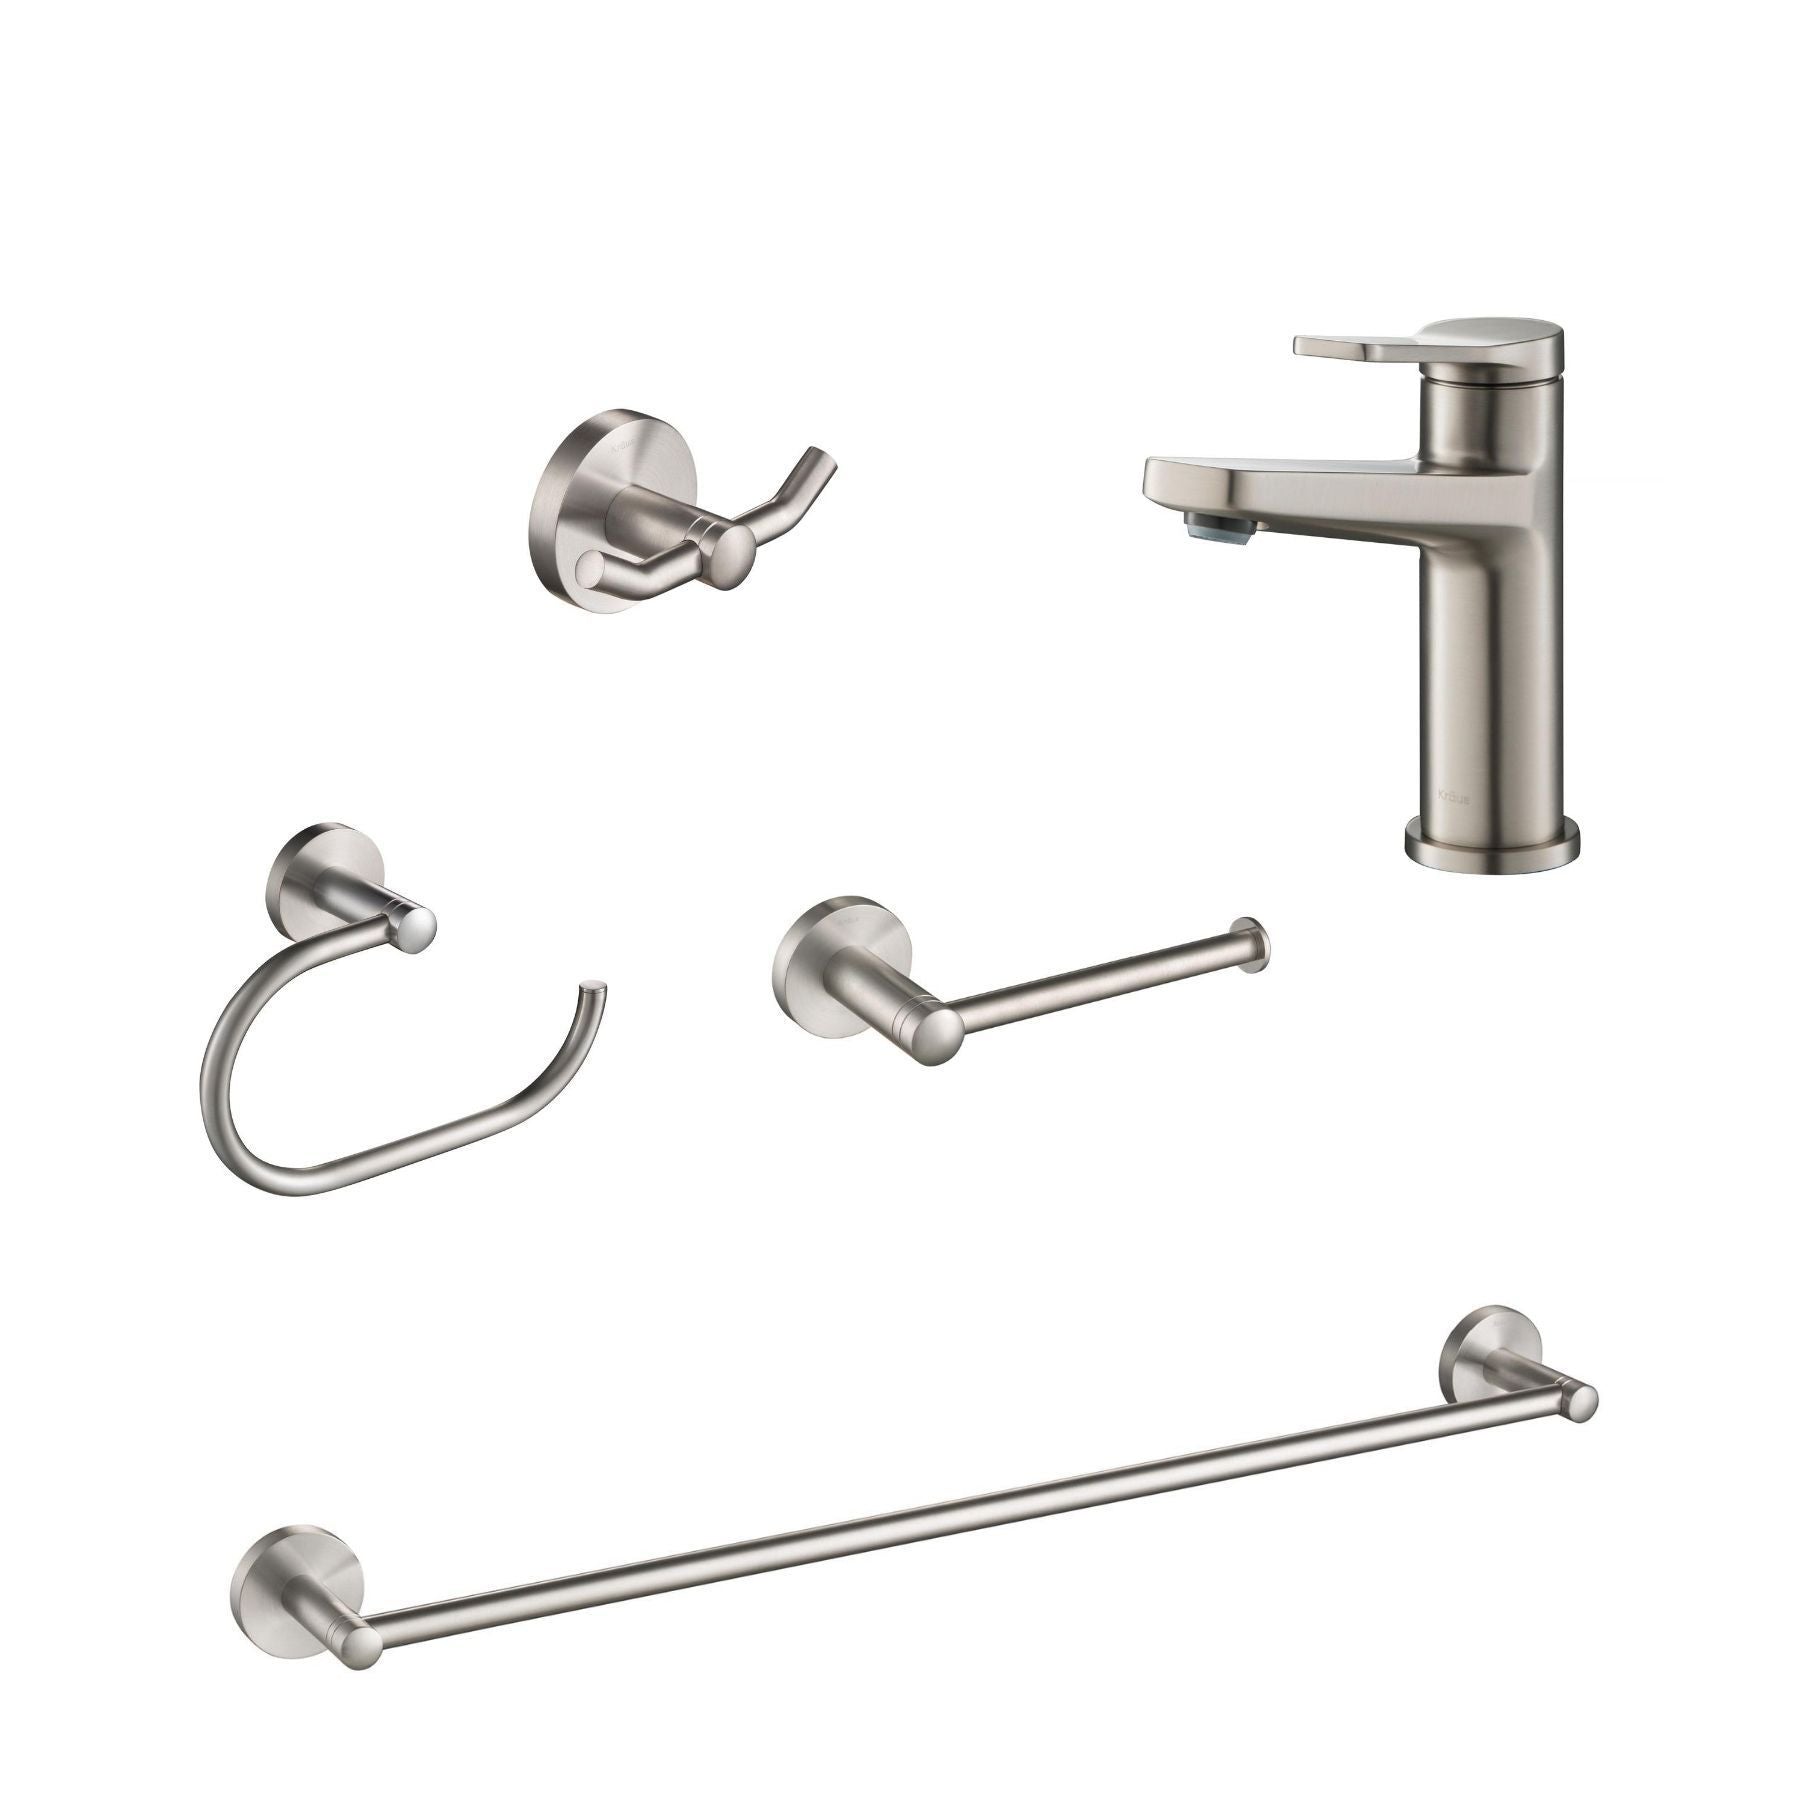 Kraus Indy Single Handle Bathroom Faucet with 24 Towel Bar Paper Holder Towel Ring and Robe Hook - Spot-Free Stainless Steel